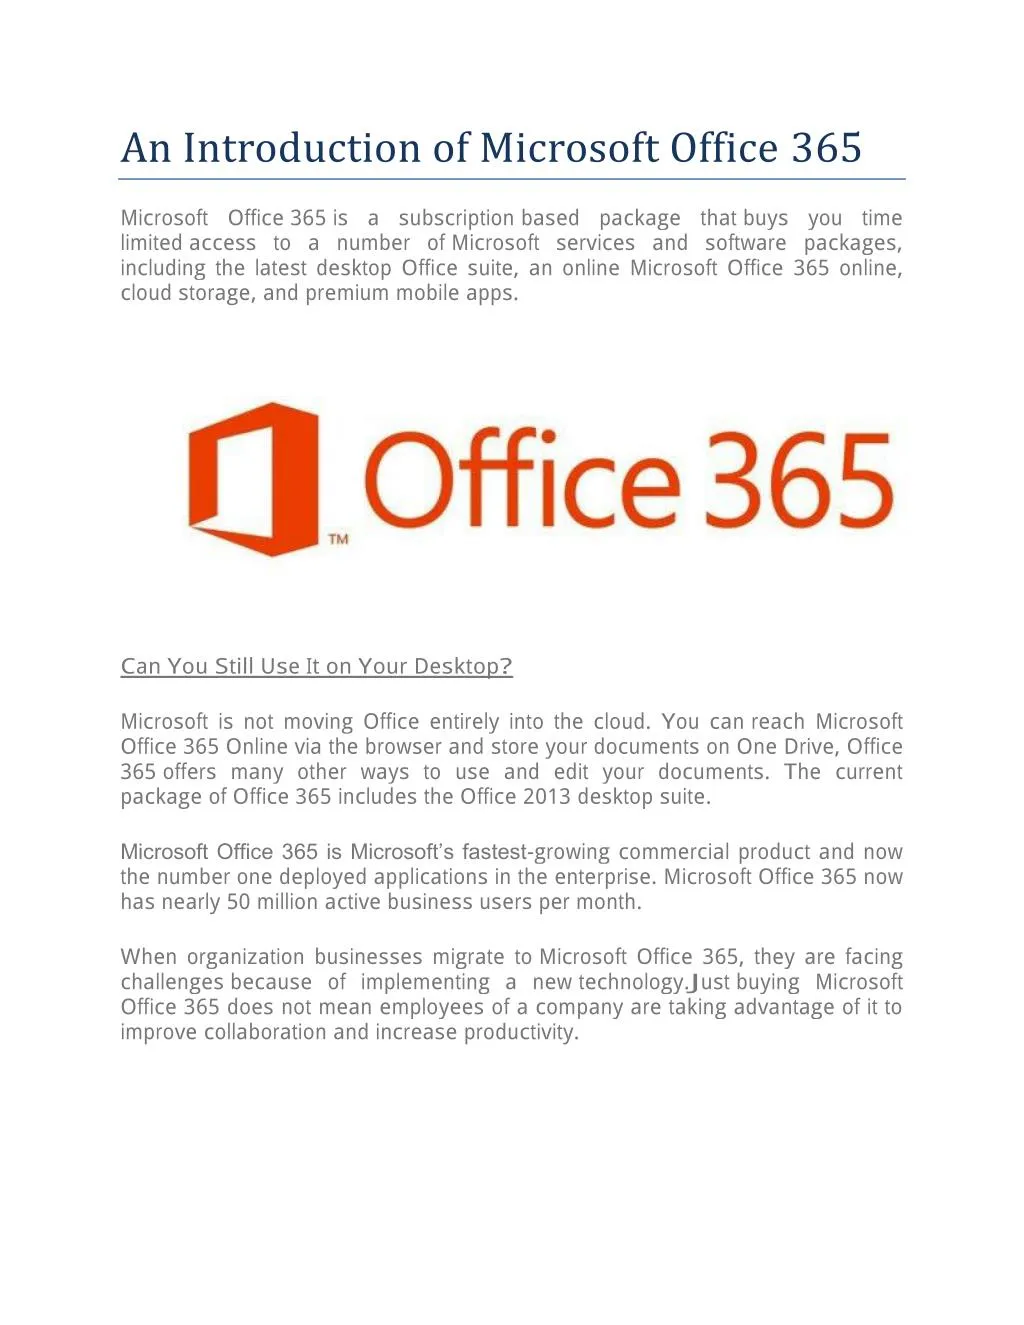 an introduction of microsoft office 365